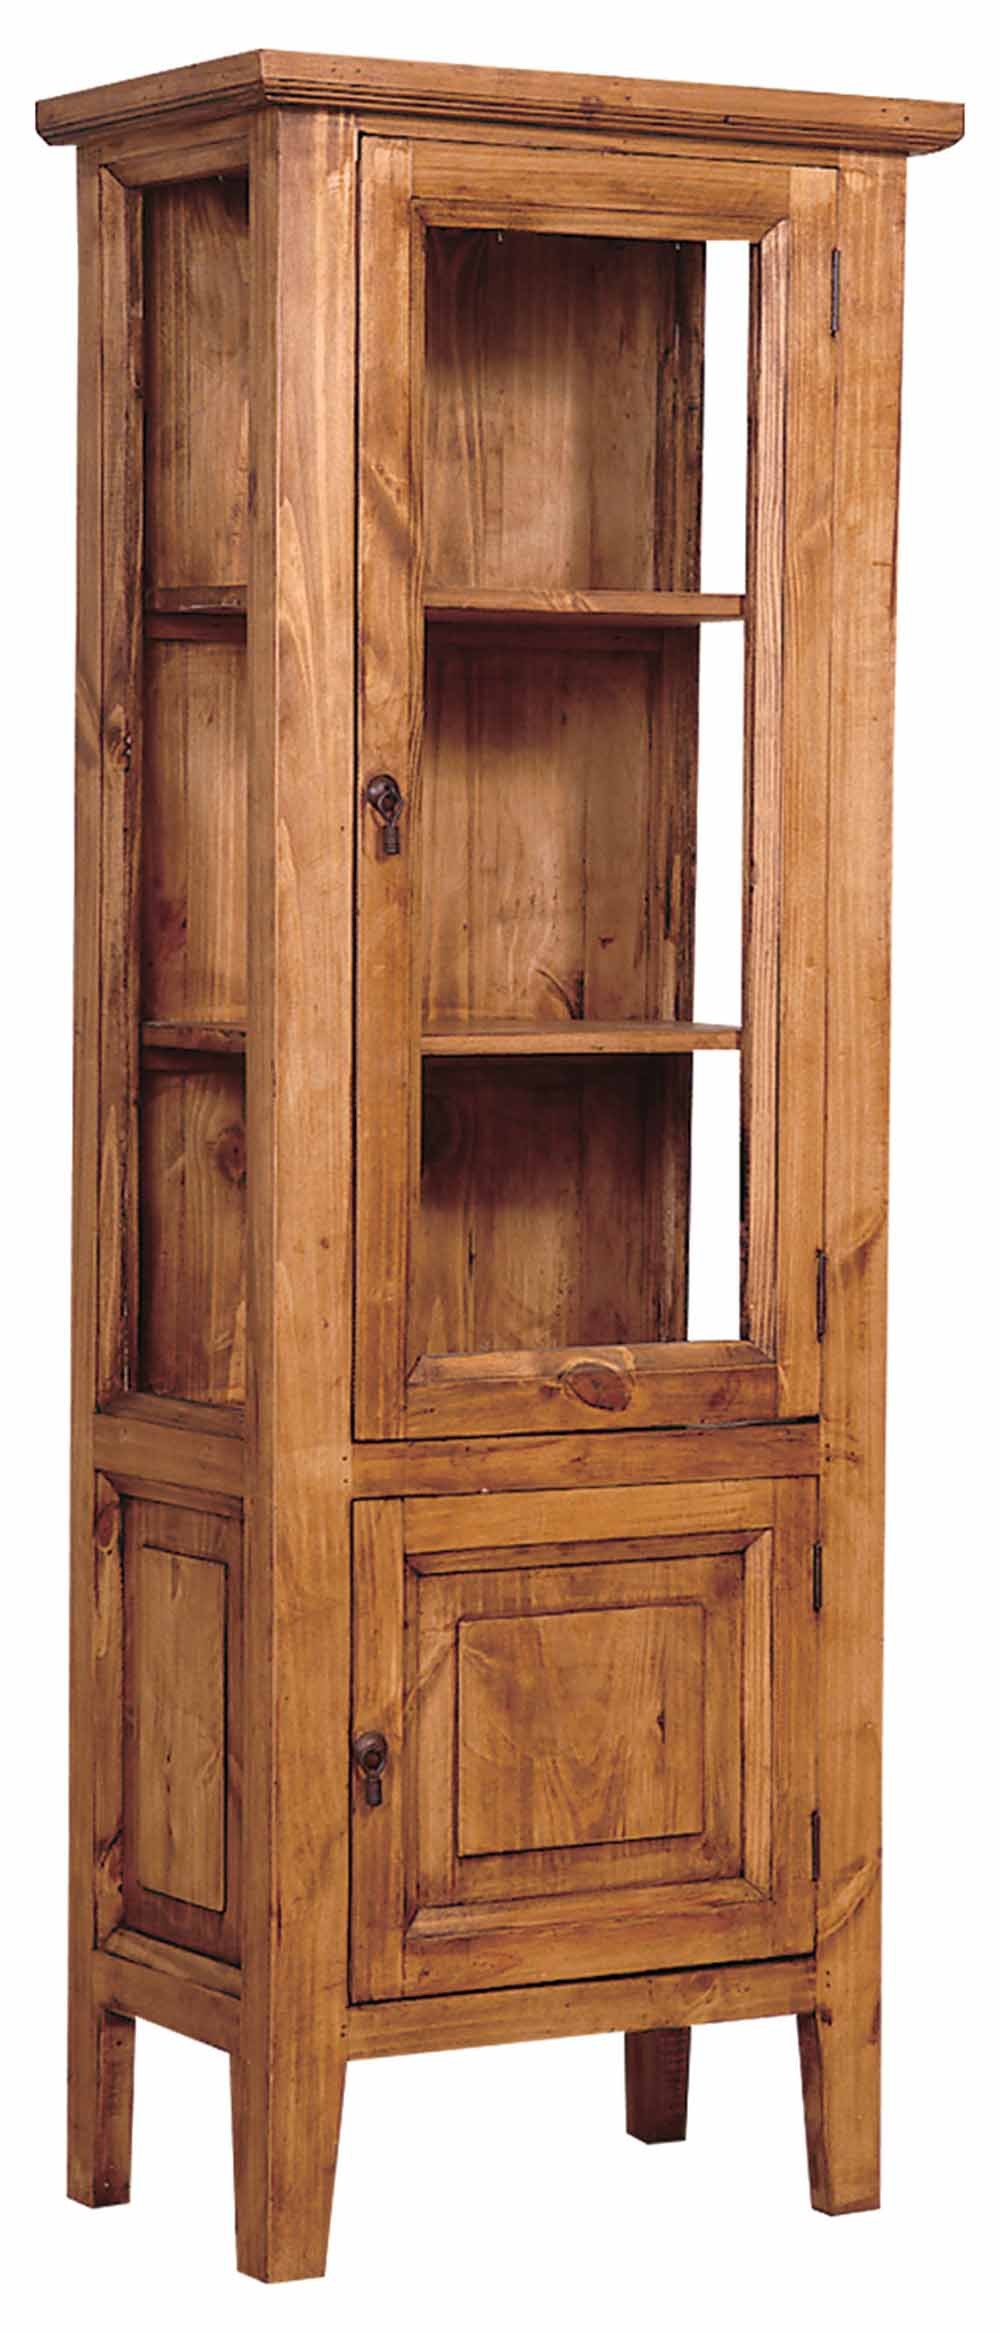 Rustic Pine Curio Cabinet Dining Furniture | Mexican ...